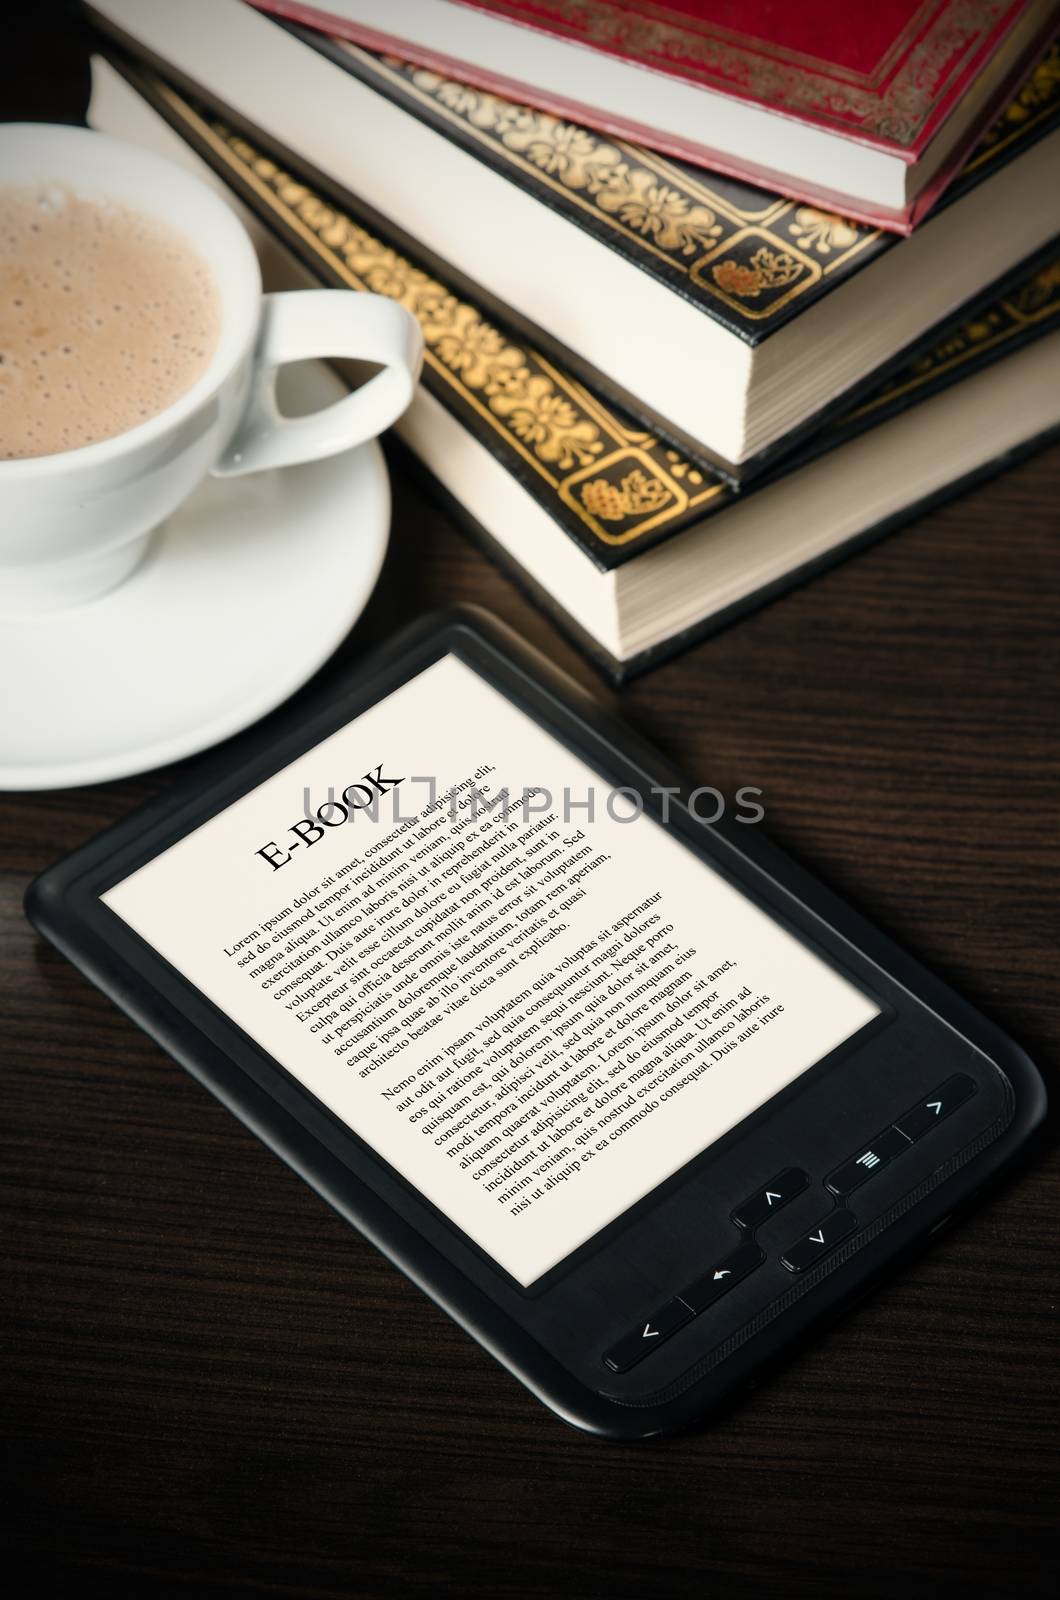 E-book reader device on desk in library by simpson33